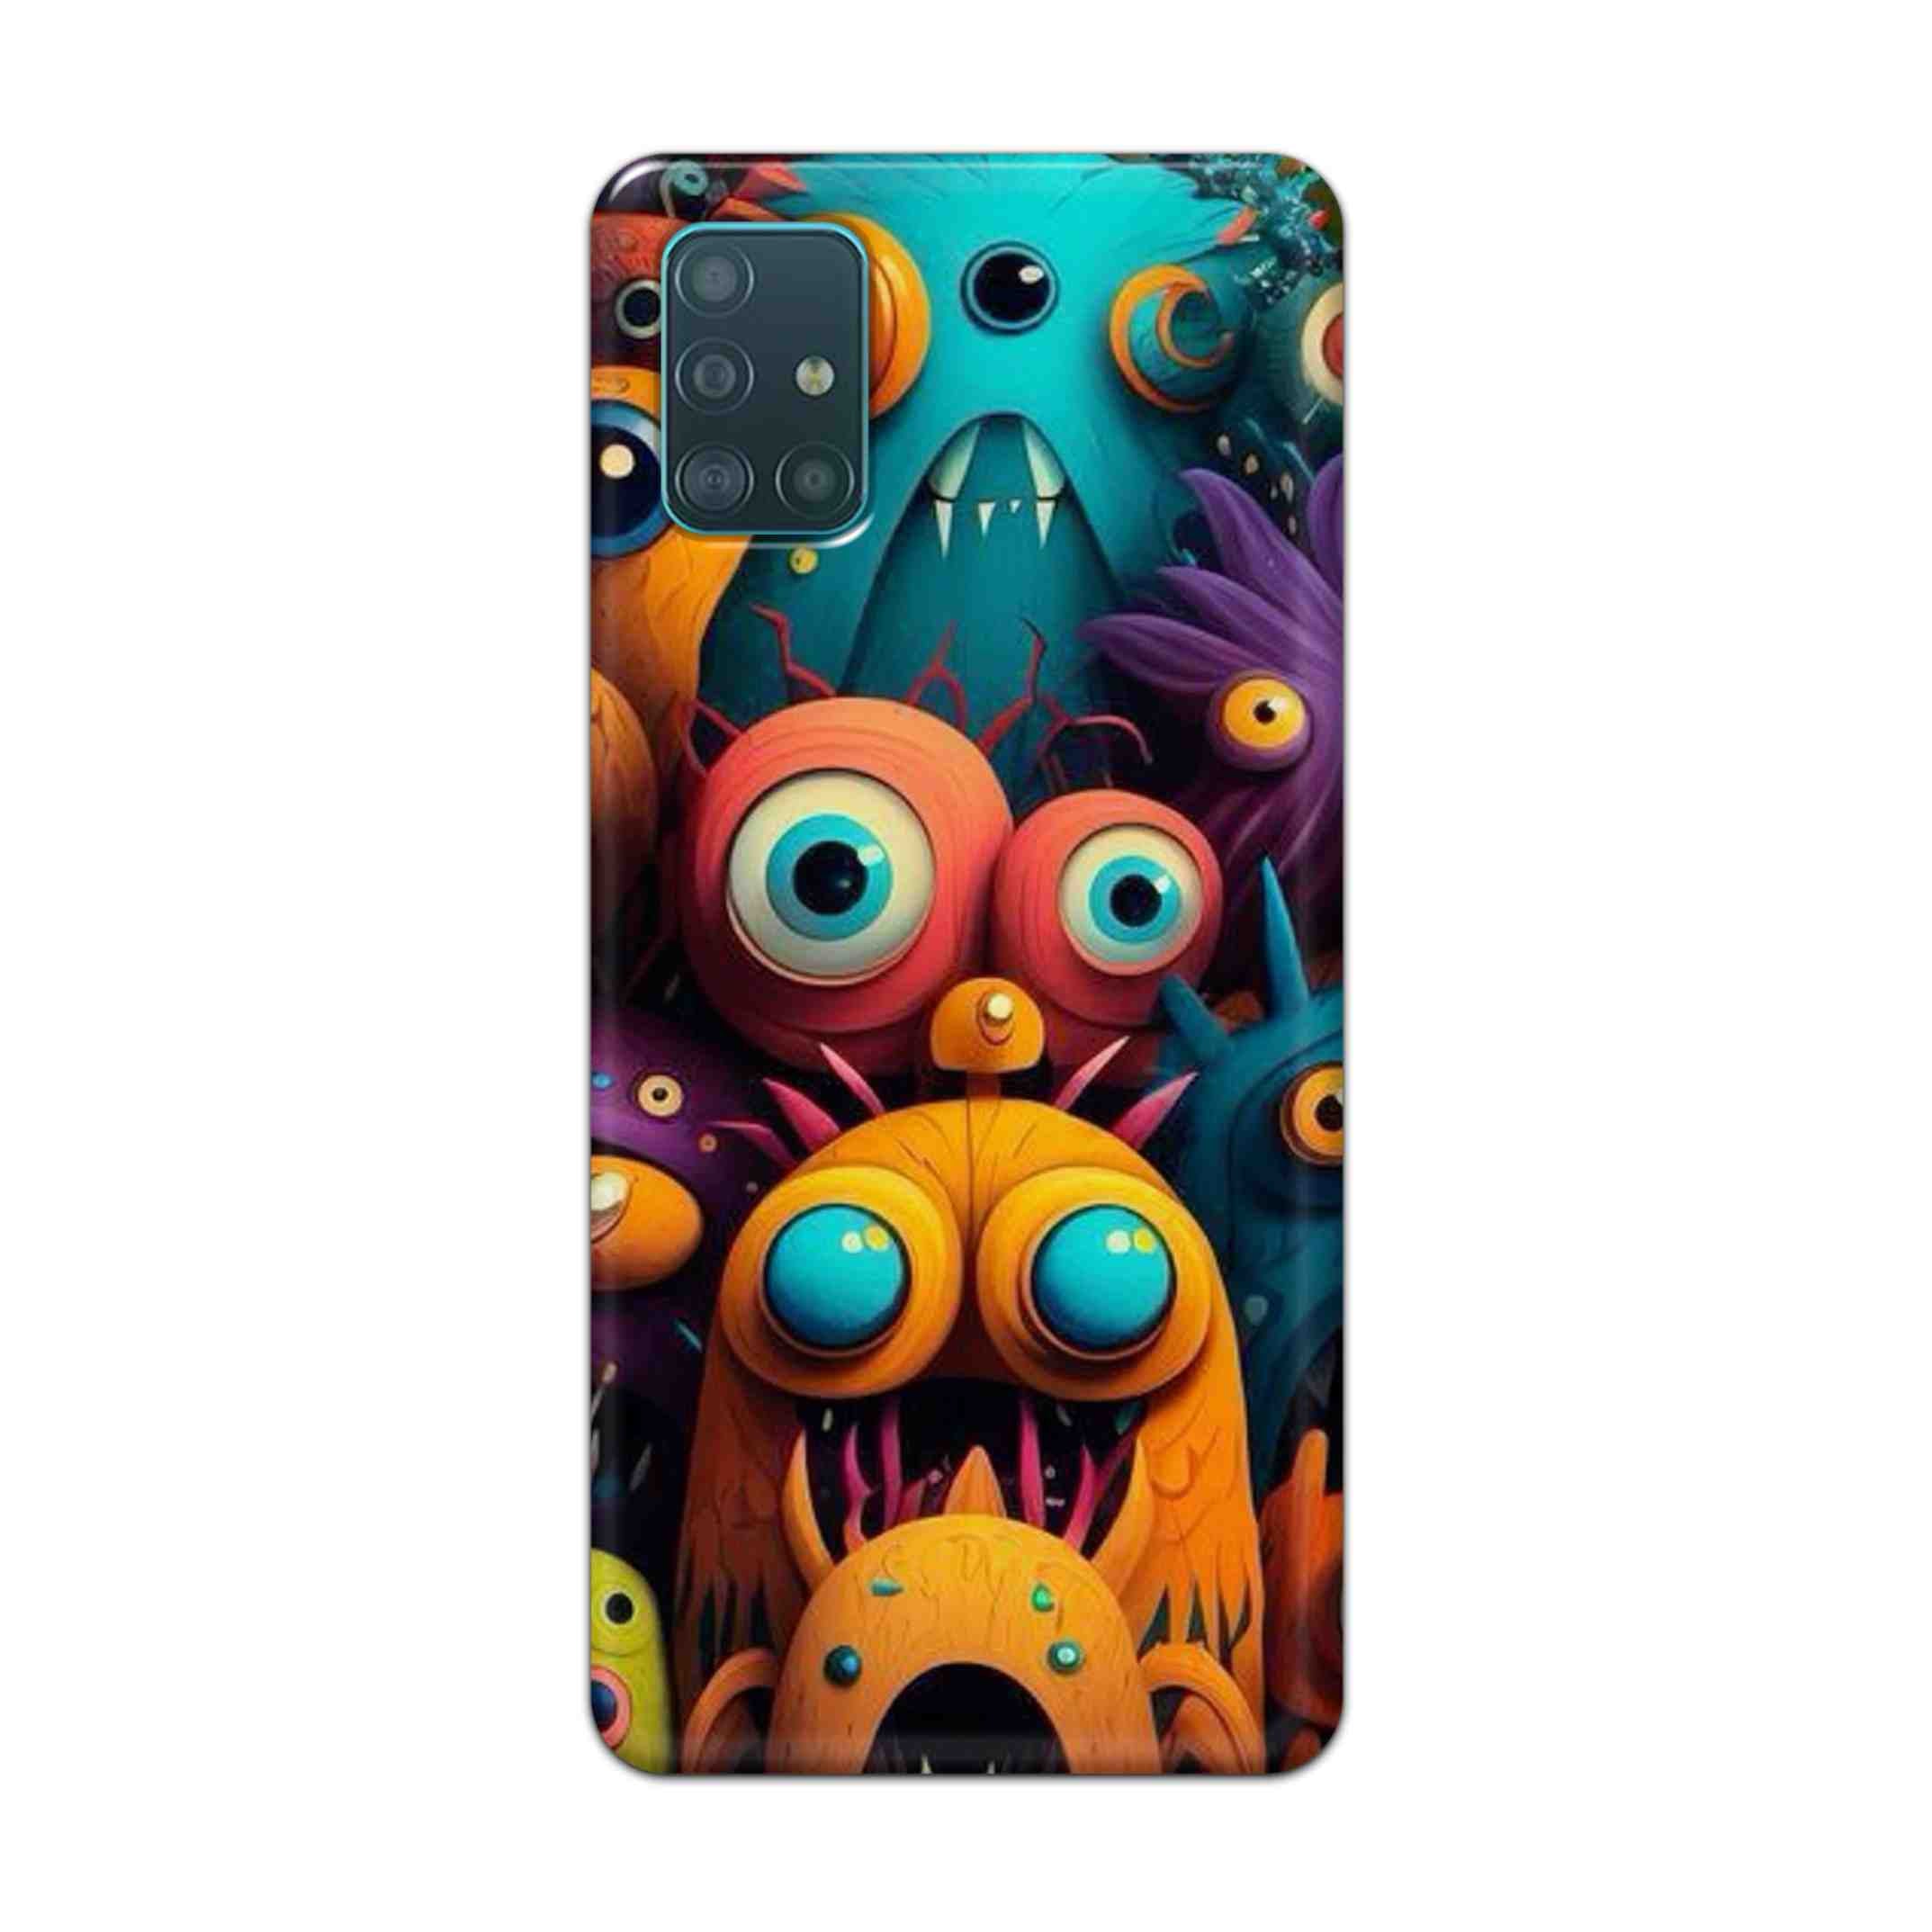 Buy Zombie Hard Back Mobile Phone Case Cover For Samsung A51 Online